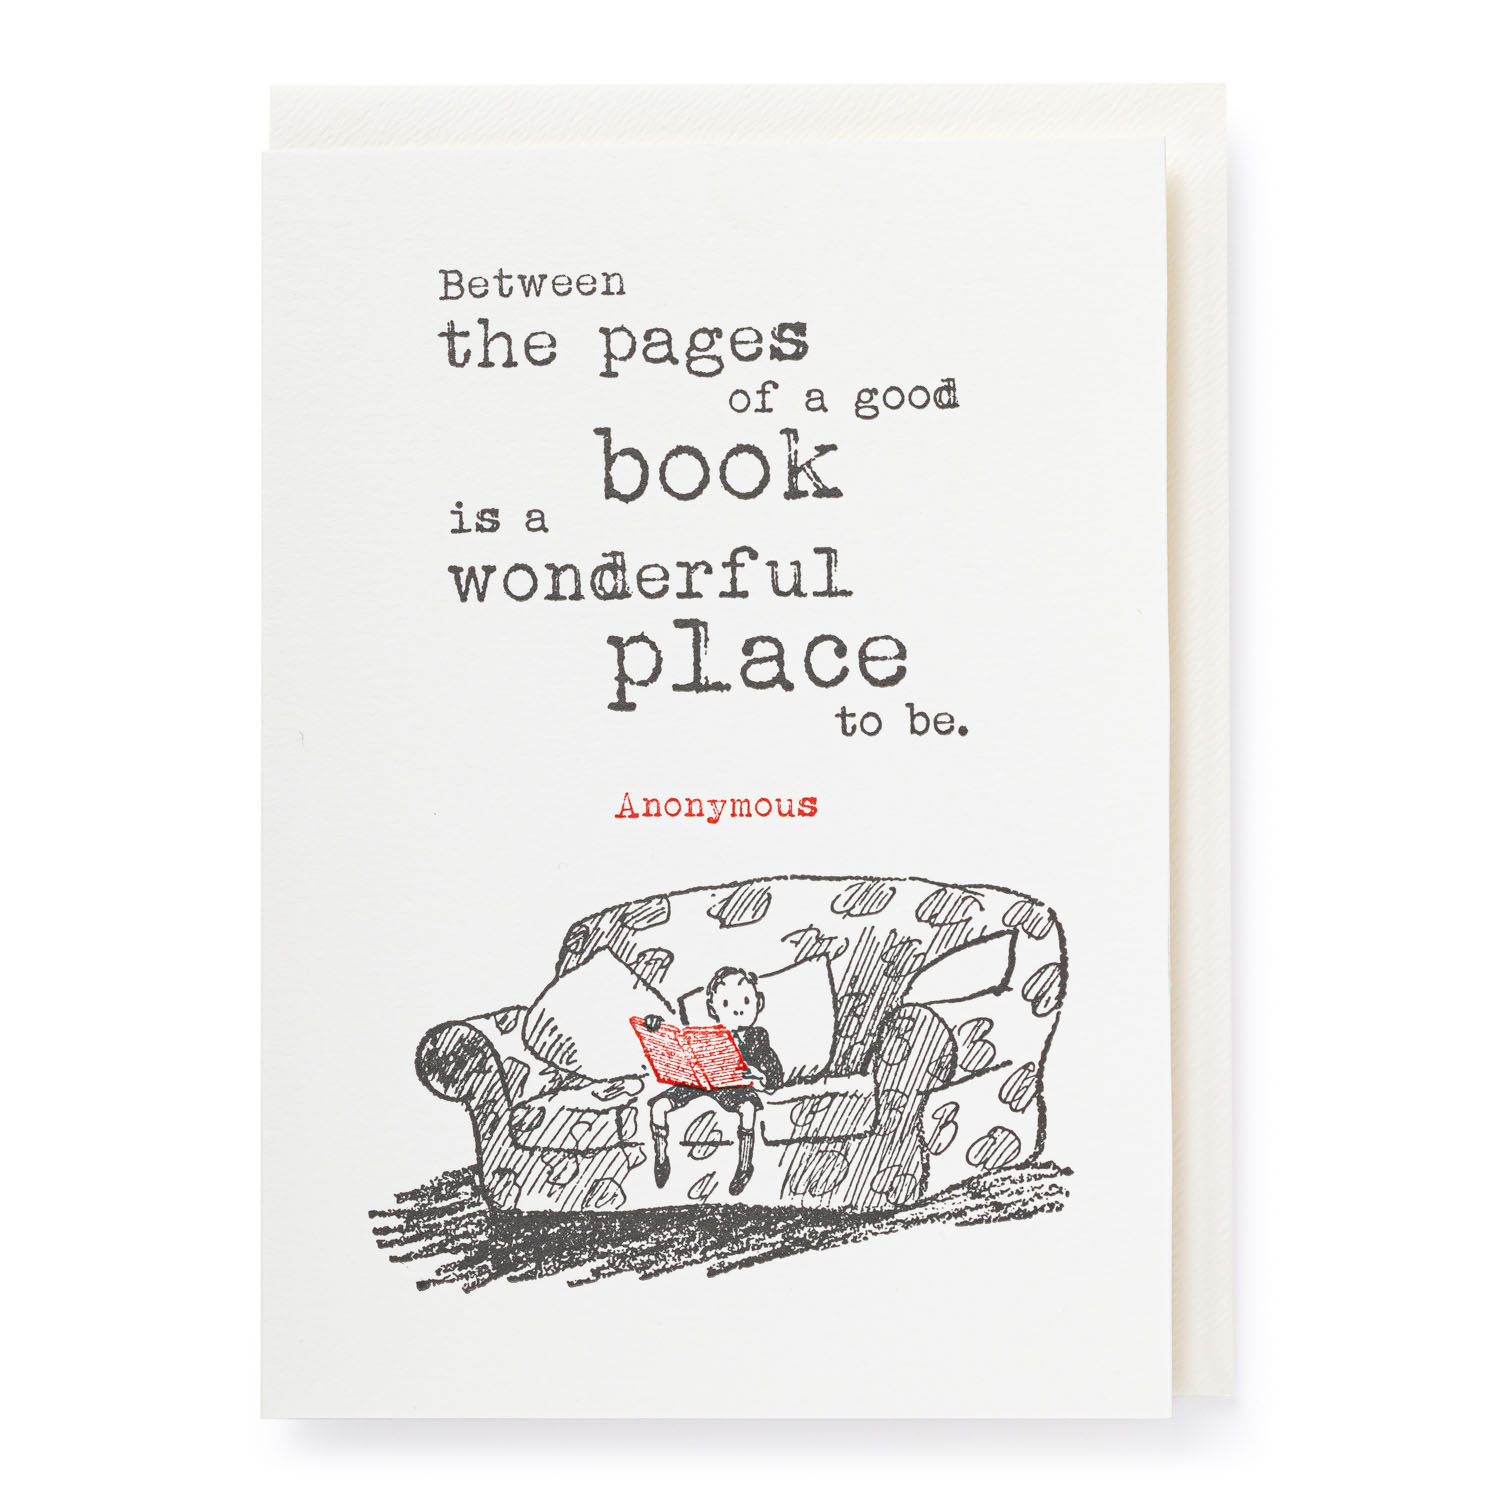 Between the pages - Letterpress Cards - from Archivist Gallery 